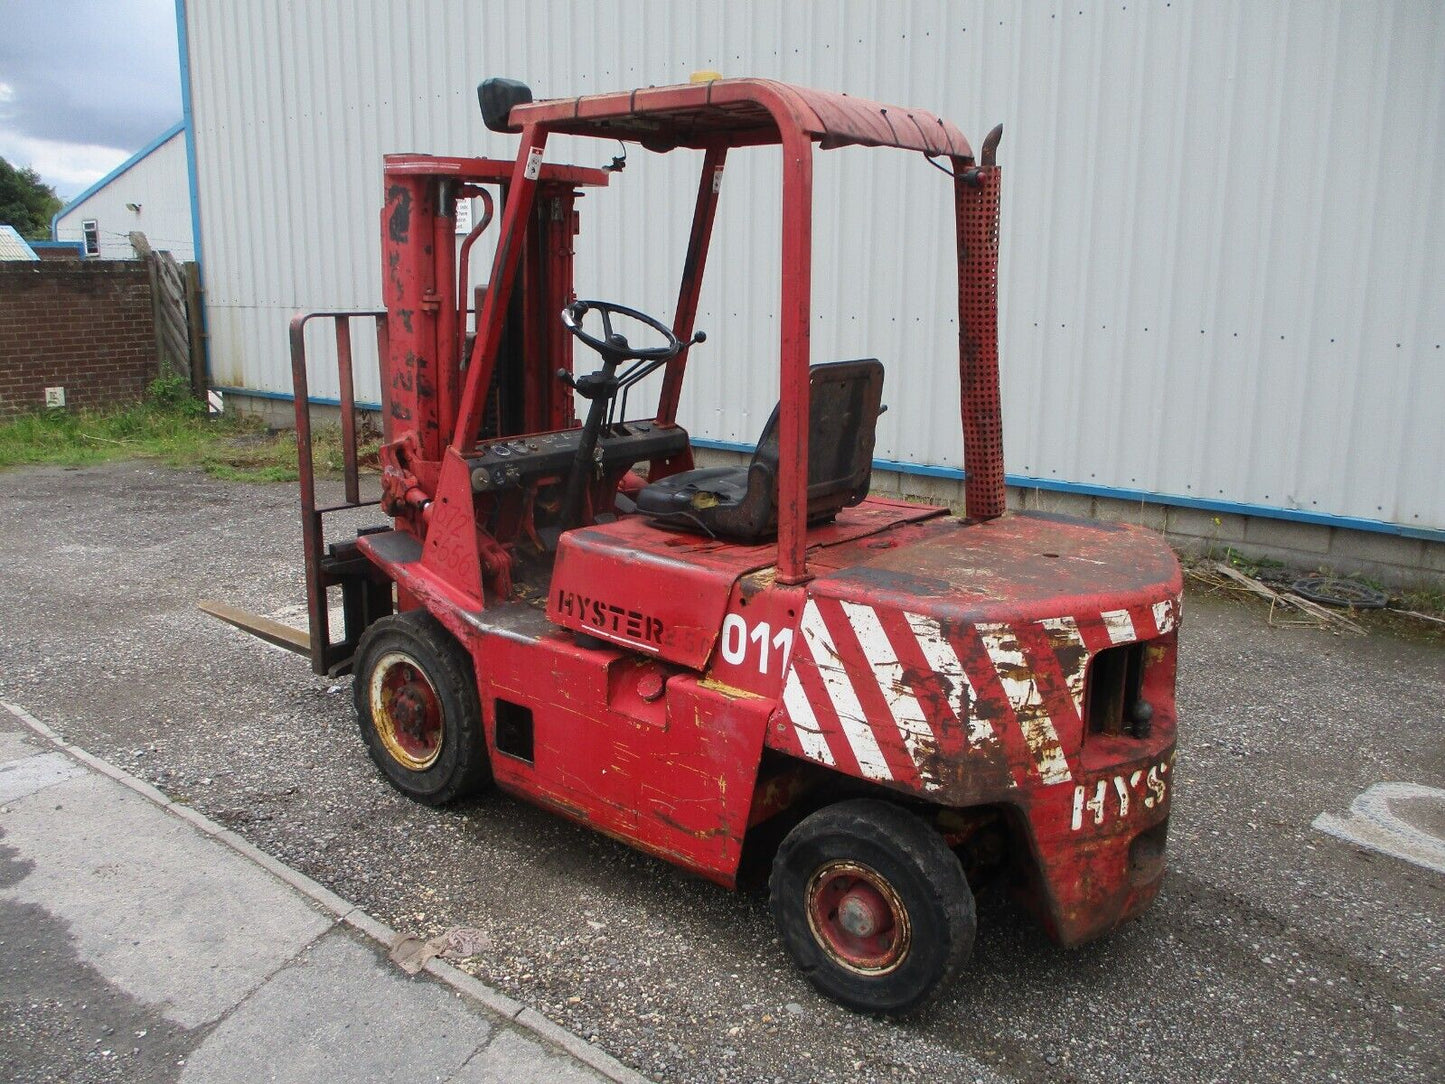 Bid on HYSTER 2.5 TON DIESEL FORKLIFT: CONTAINER SPEC EXCELLENCE- Buy &amp; Sell on Auction with EAMA Group